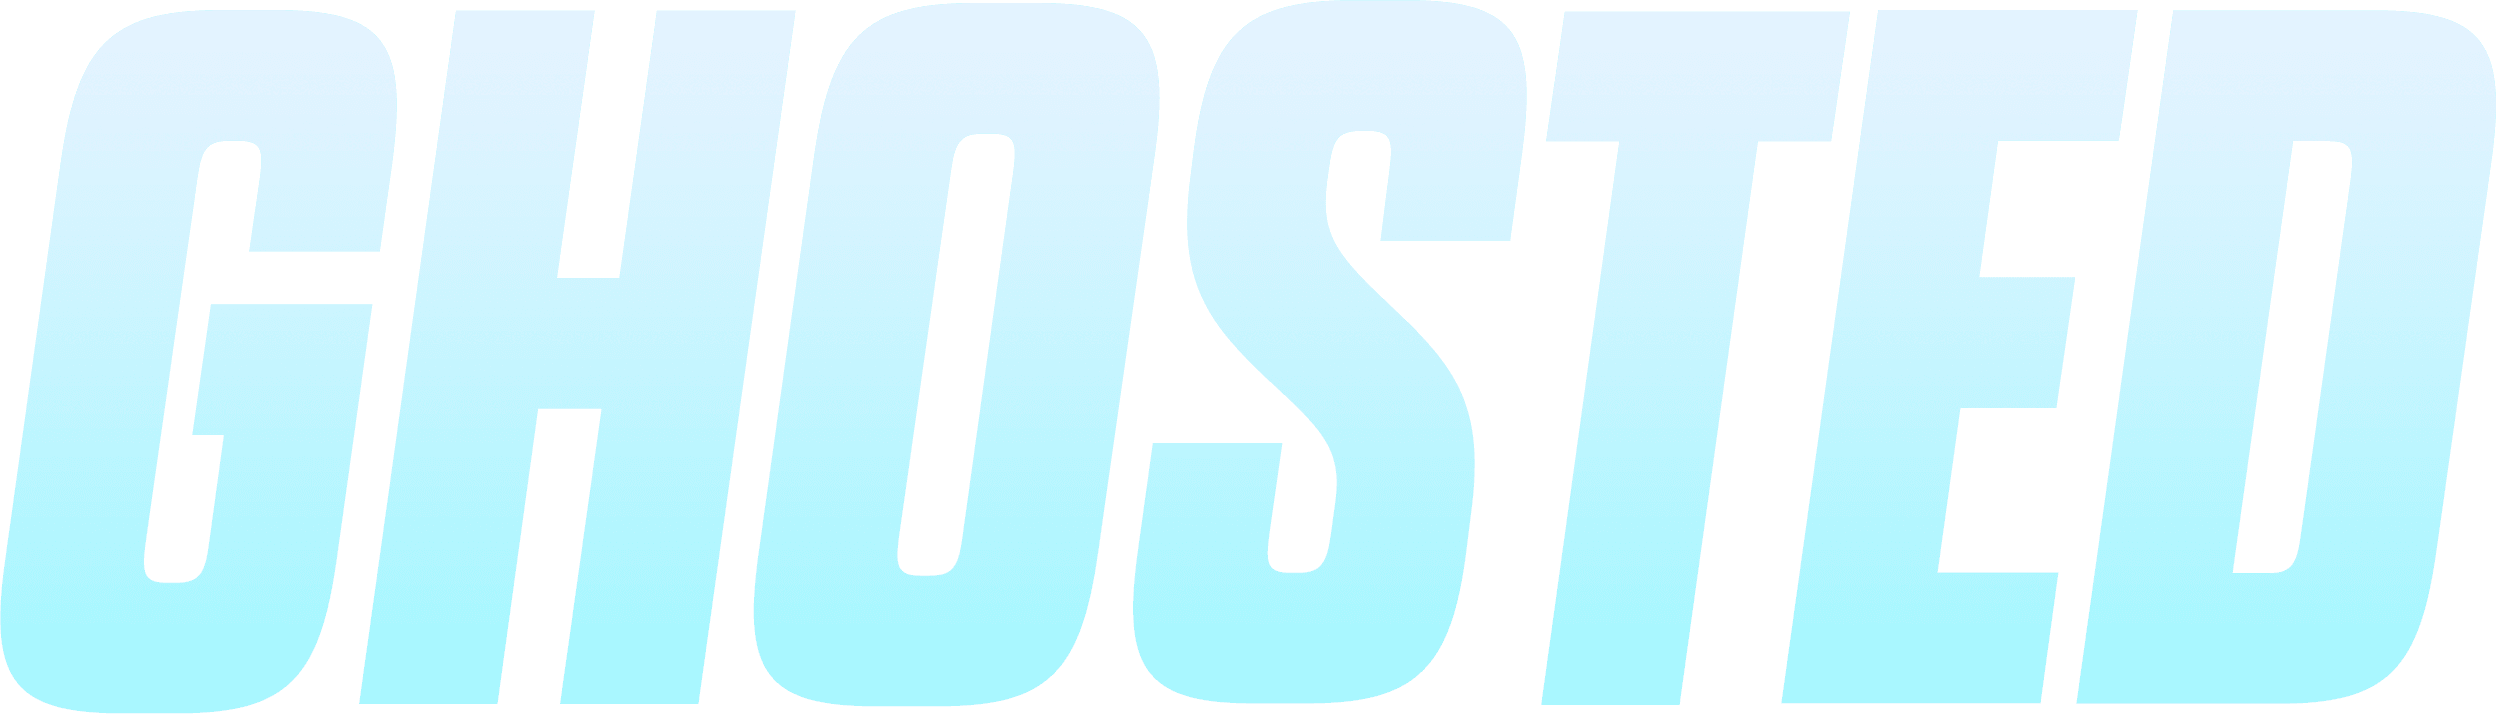 Ghosted logo